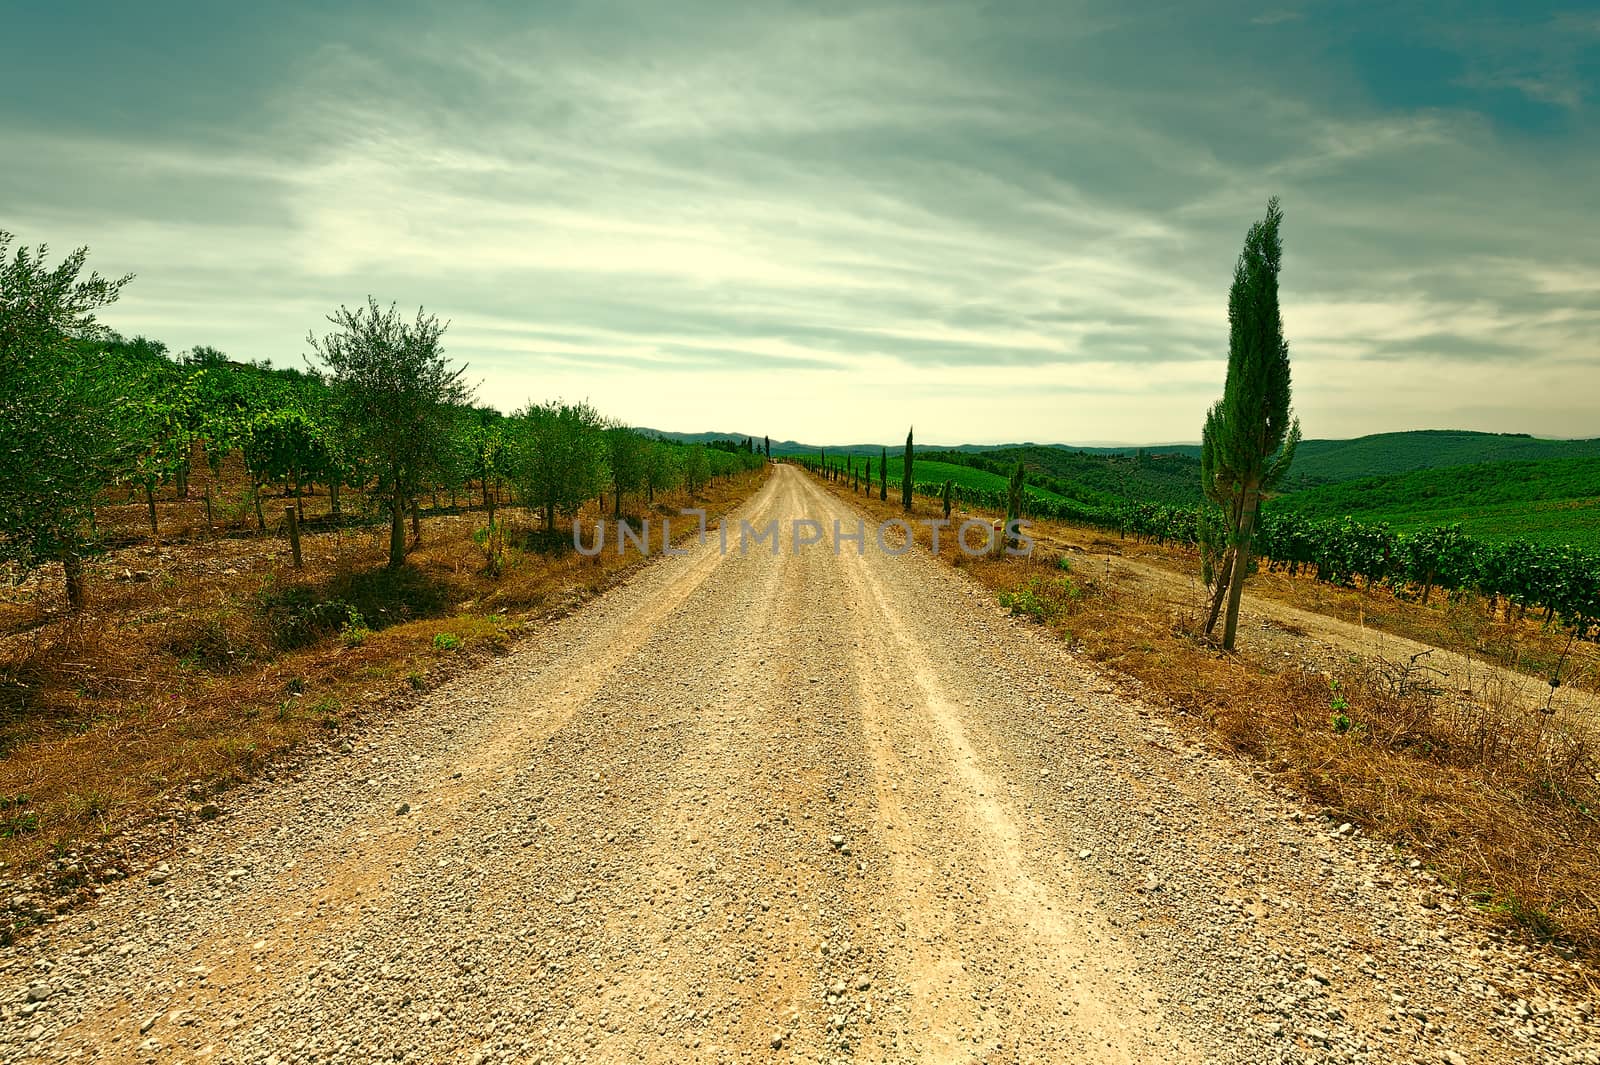 Dirt Road between Hill of Tuscany with Vineyard at Sunset, Vintage Style Toned Picture